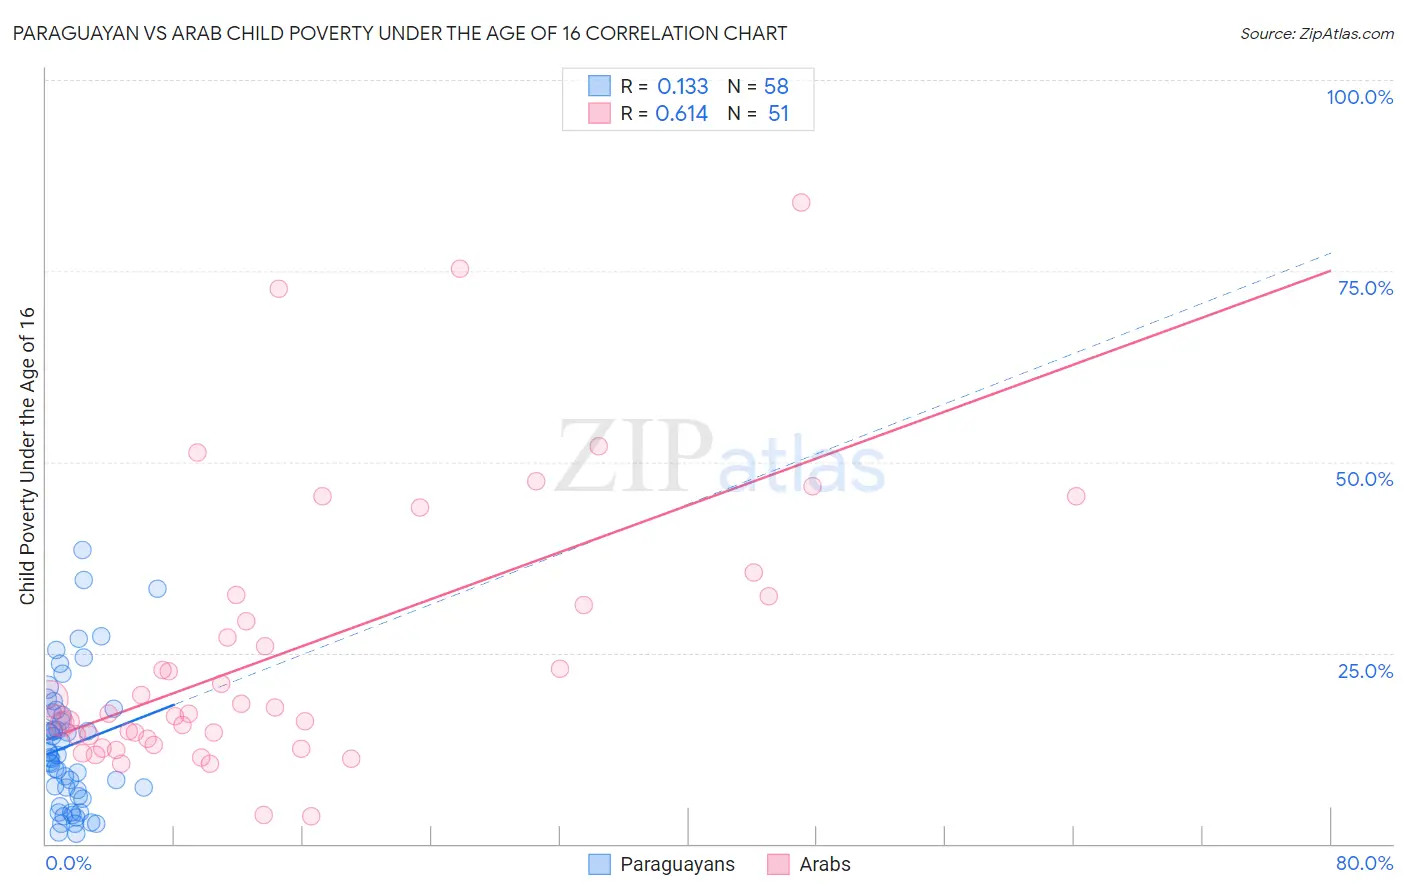 Paraguayan vs Arab Child Poverty Under the Age of 16